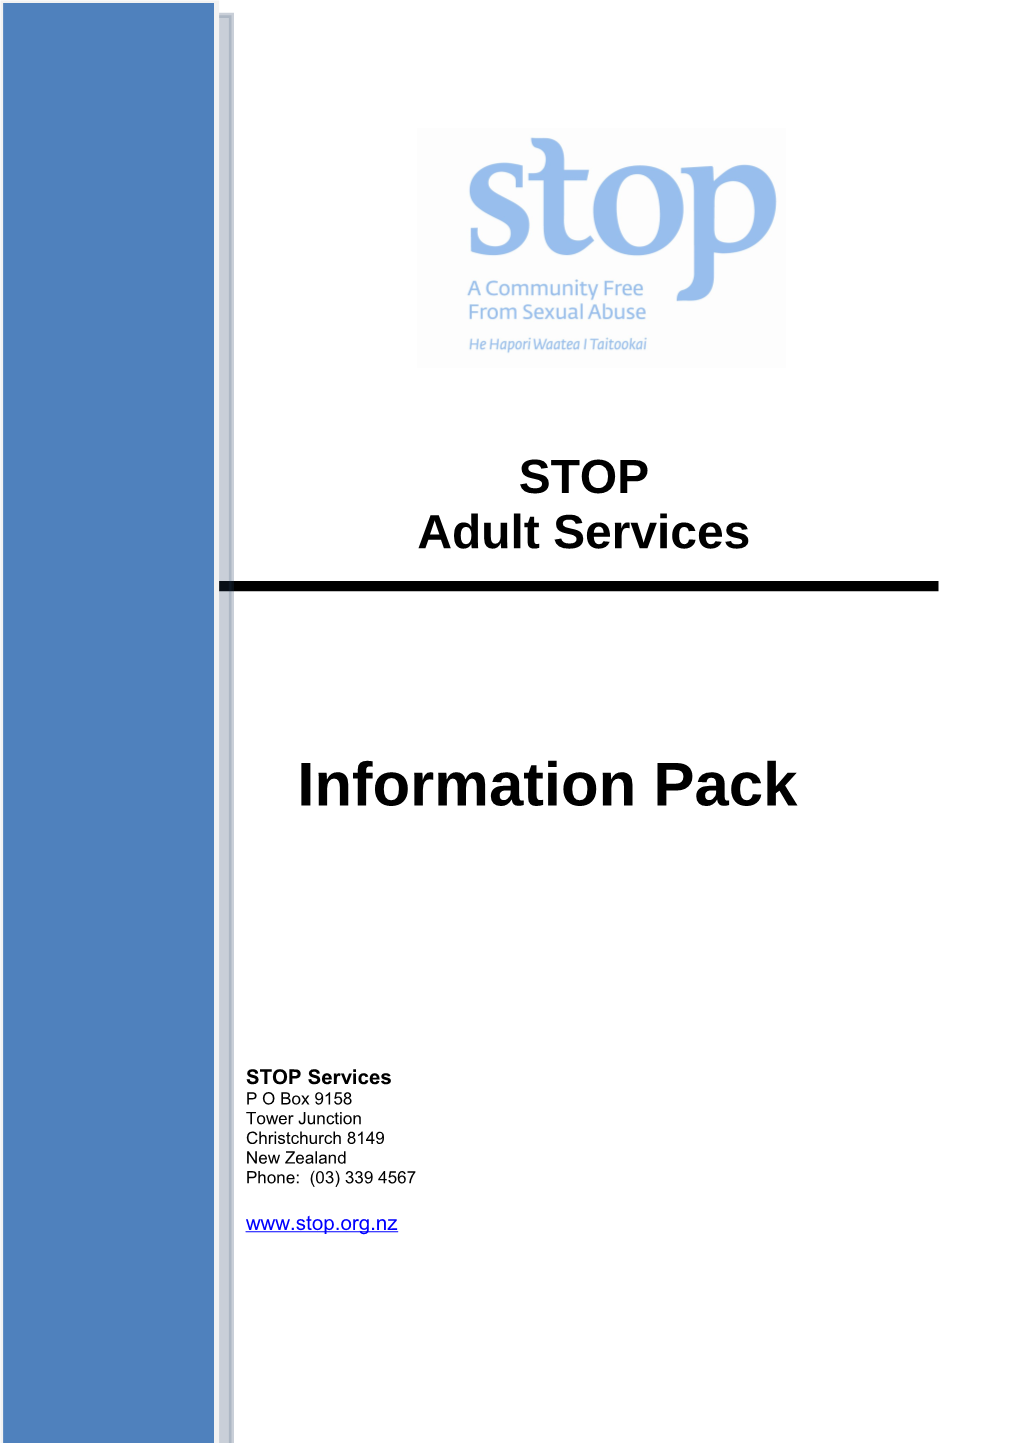 The STOP Adolescent Programme